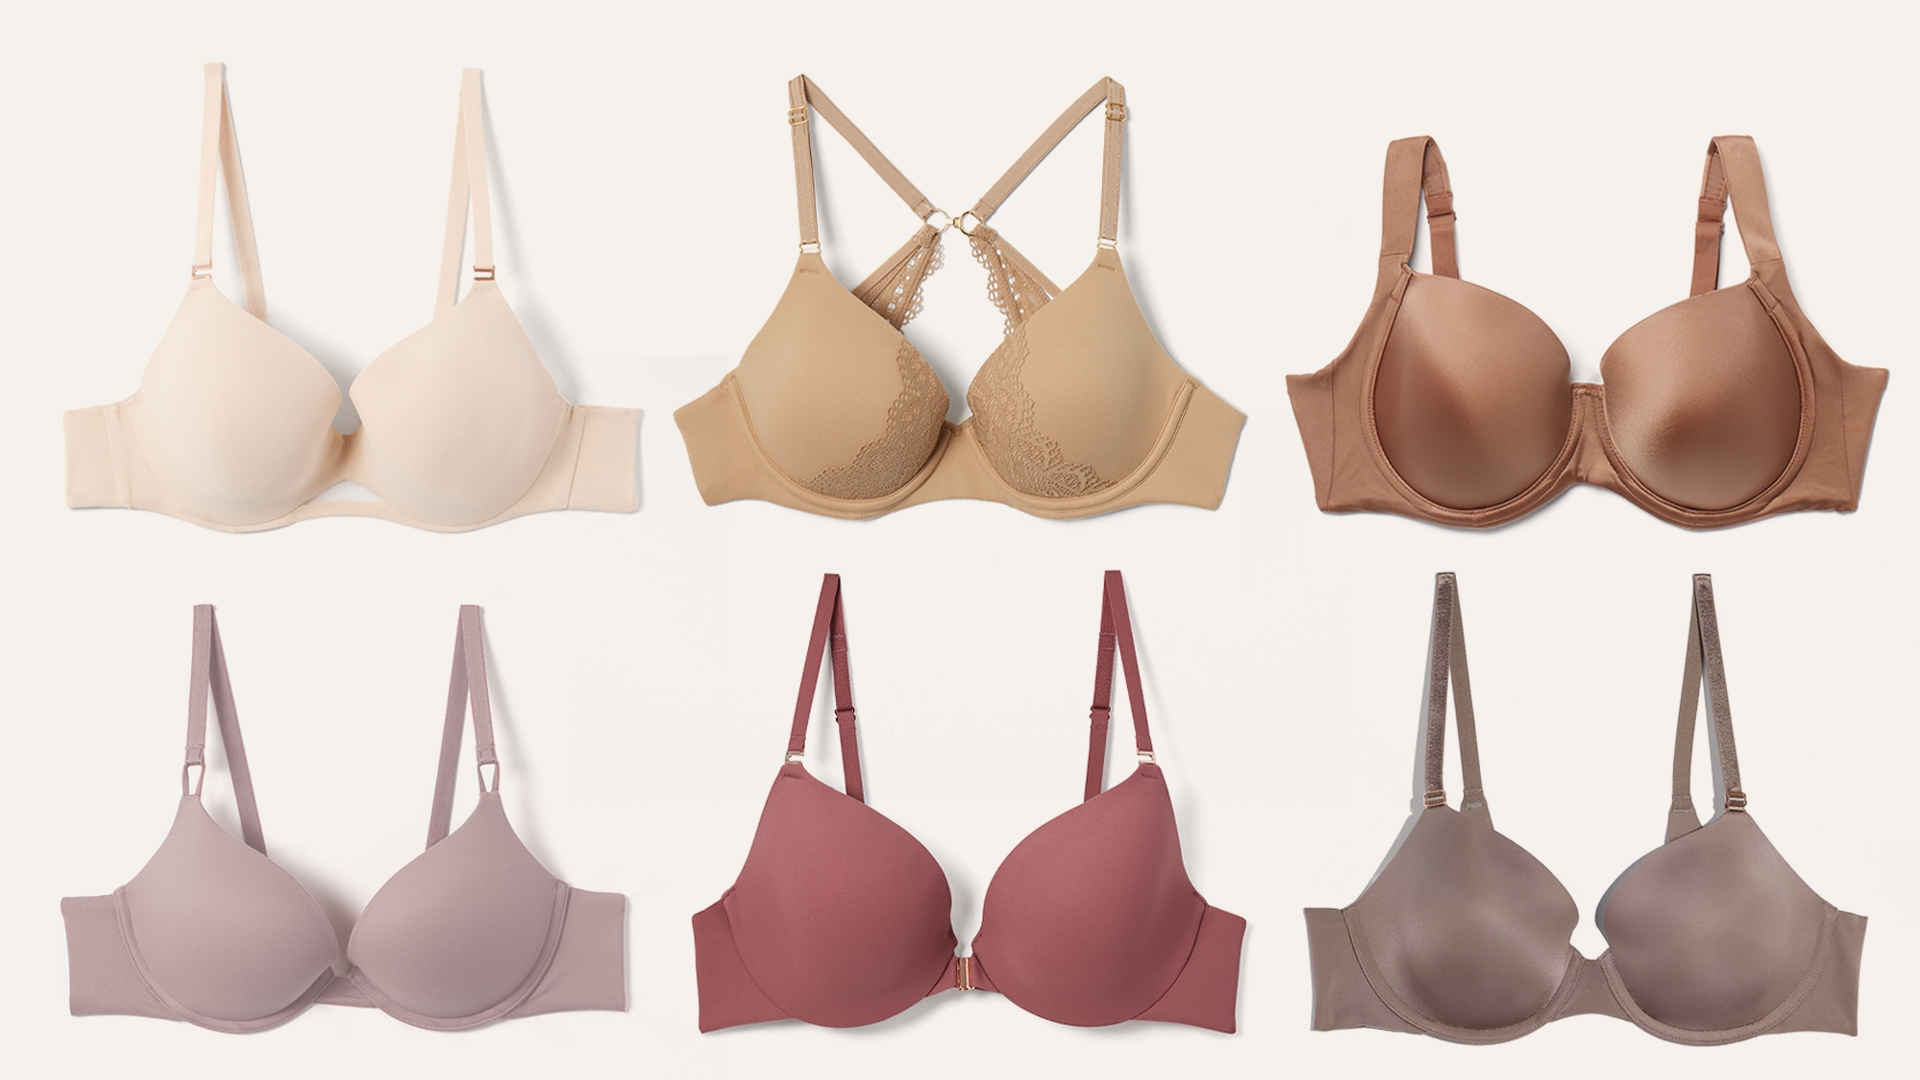  Soma<sup class=st-superscript>®</sup> laydown of nude bras in a variety of shades in cool, neutral, and warm undertones.